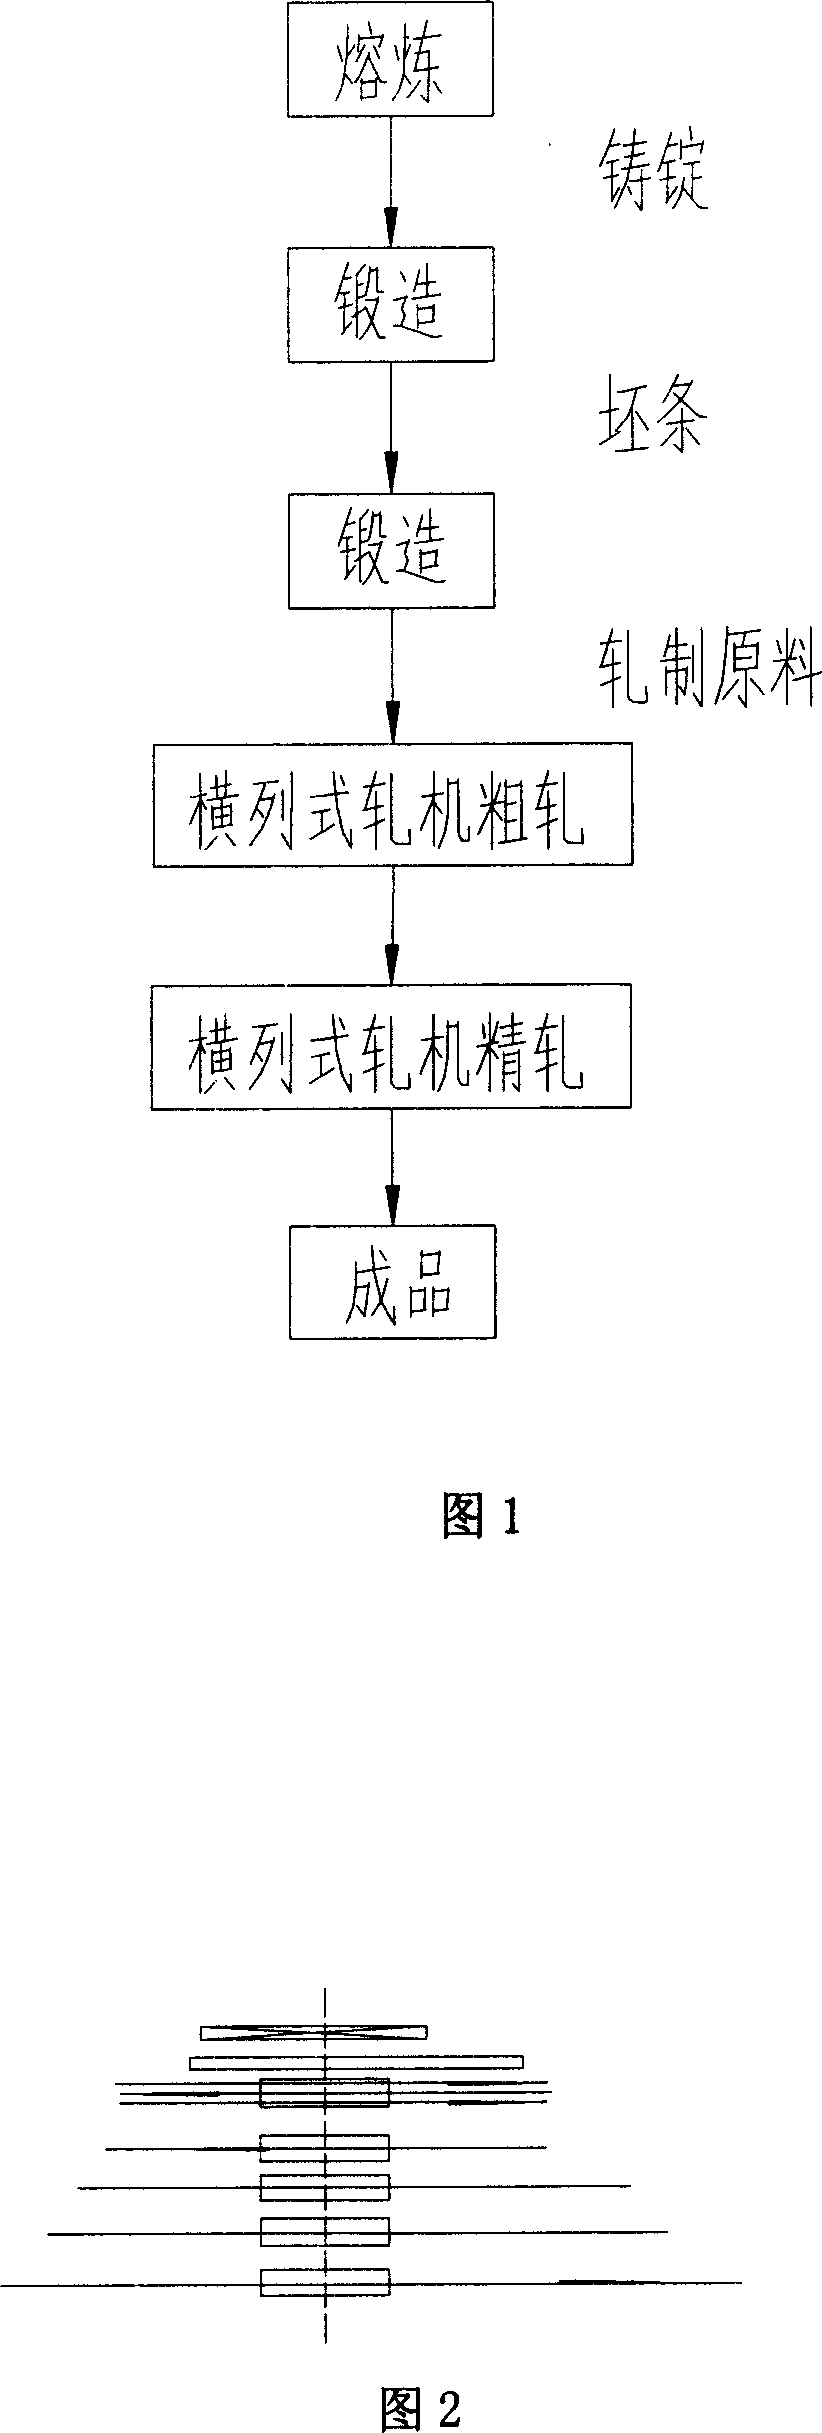 Method for rolling pure titanium rod and wire